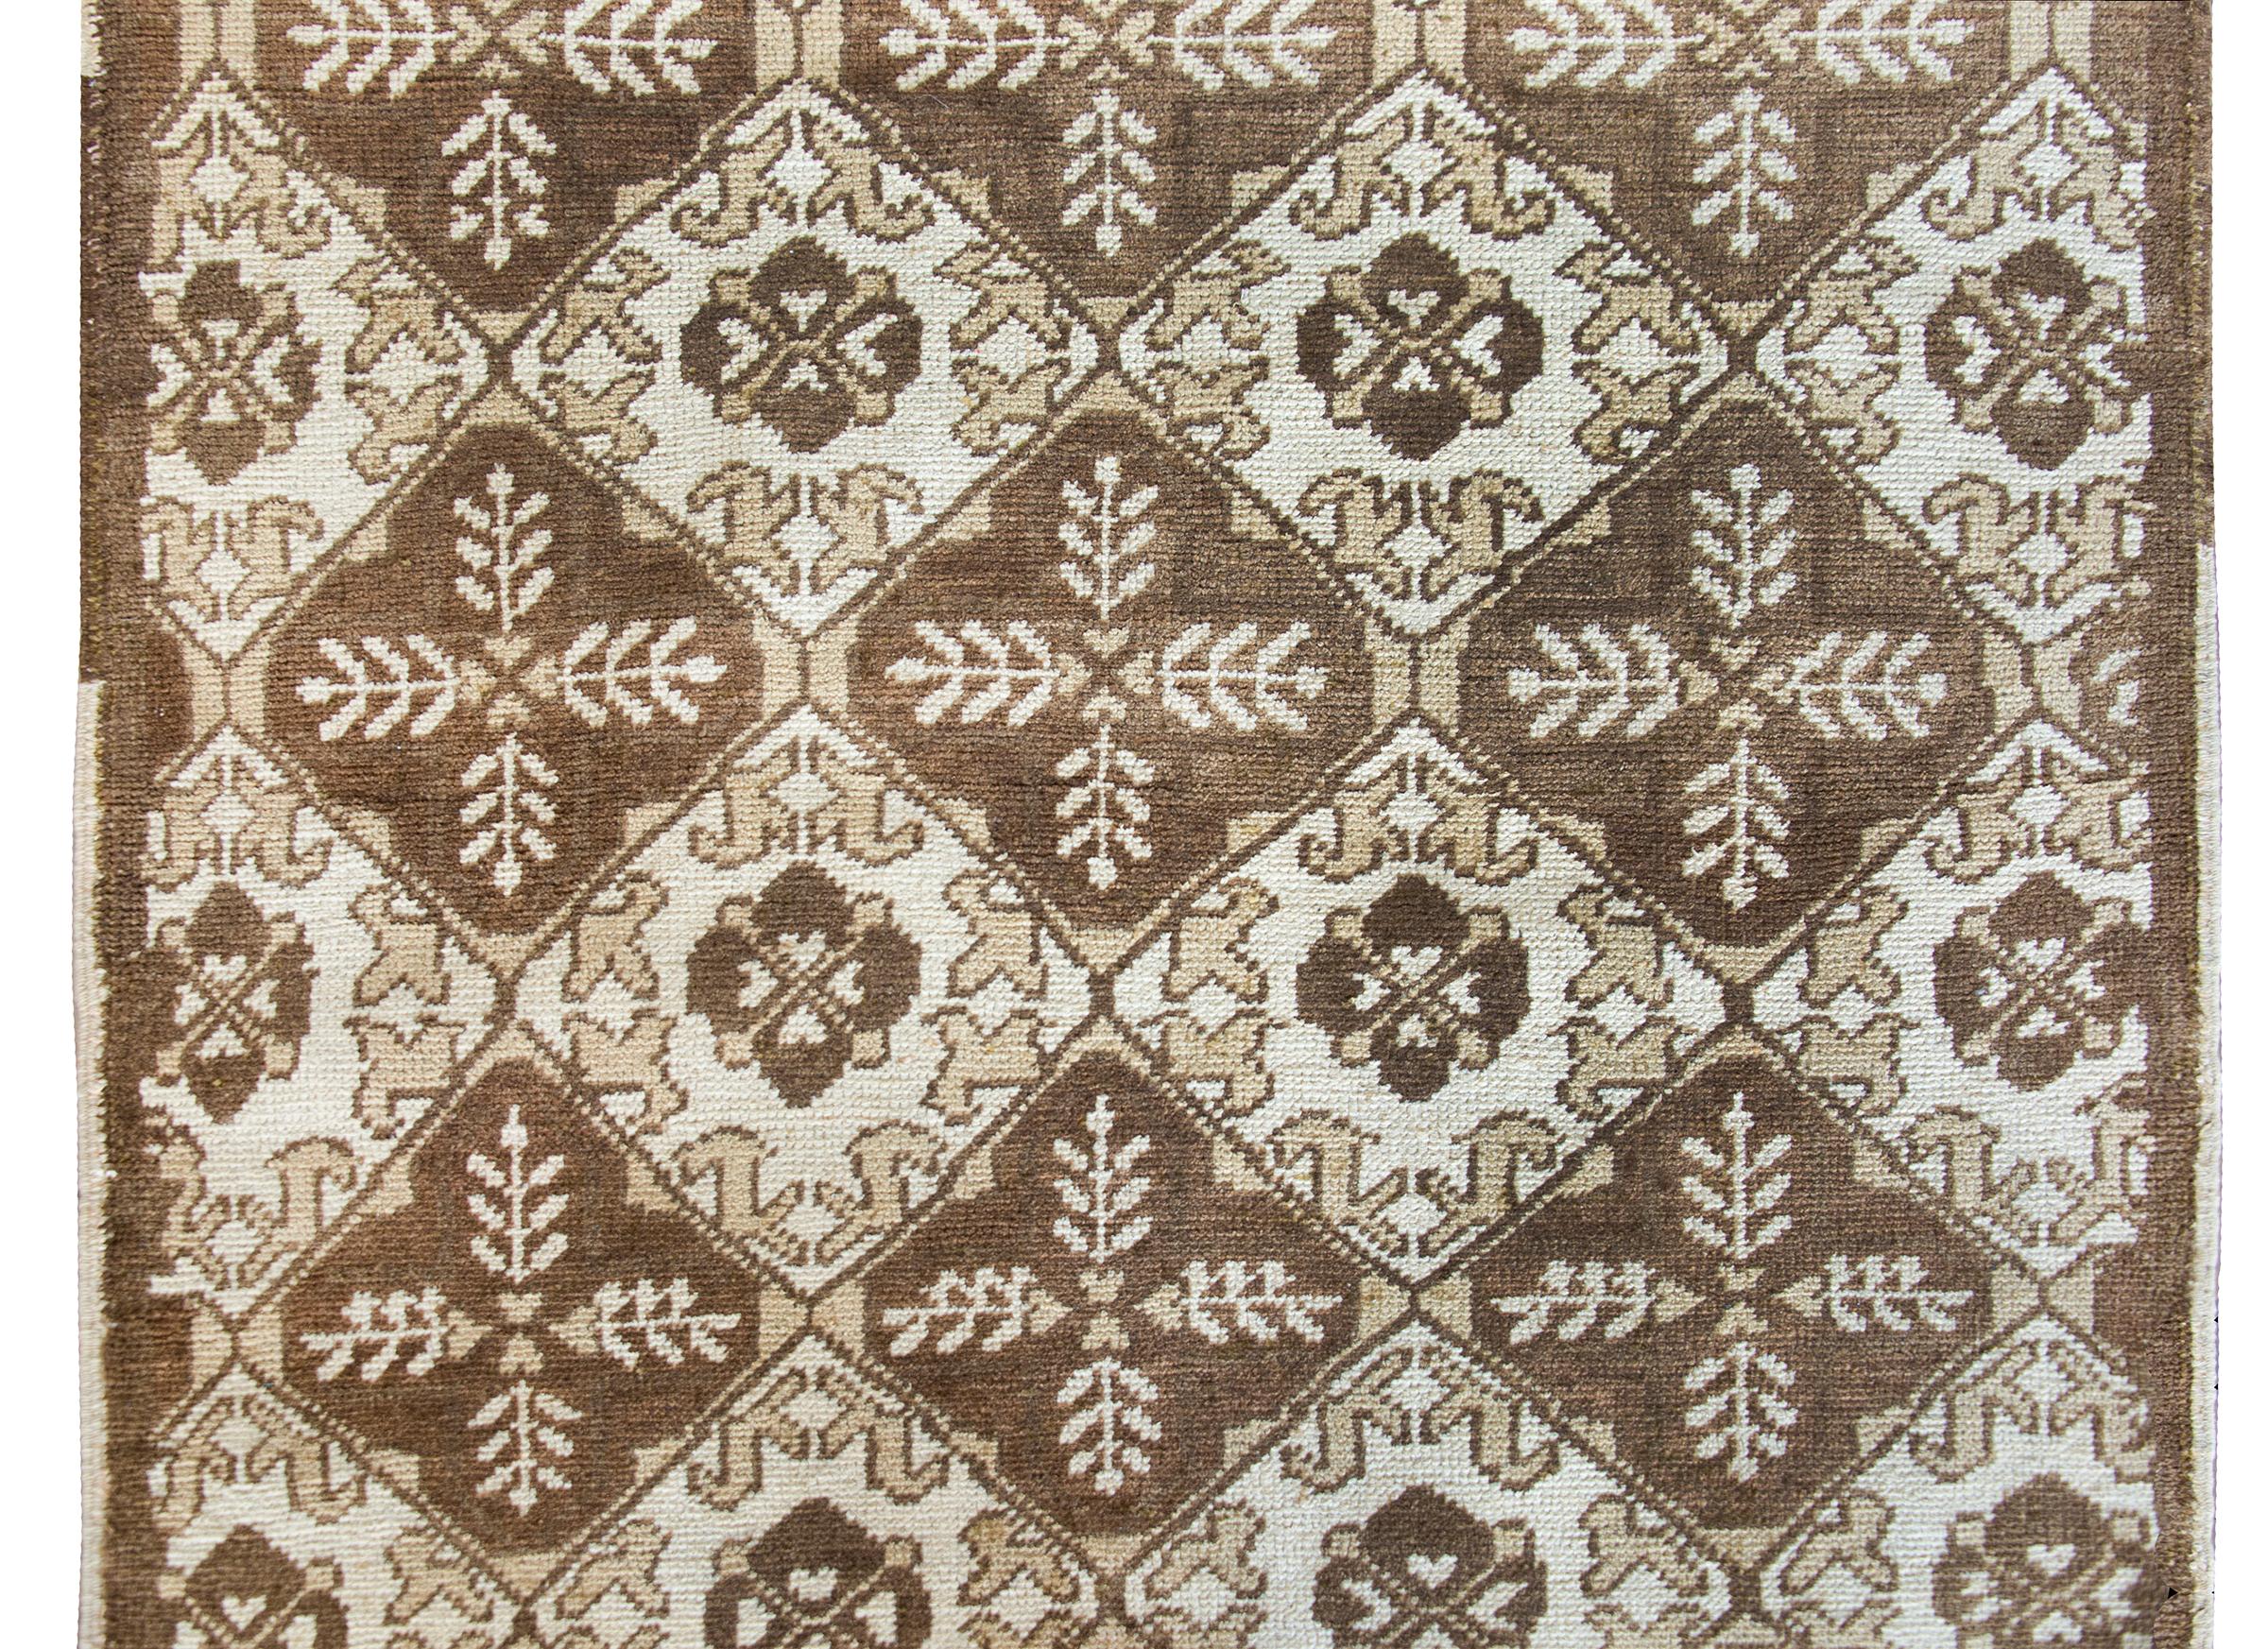 A wonderful mid-20th century Turkish Oushak rug with an all-over repeated stylized floral and leaf pattern woven in varying shades of brown, beige, and tan.